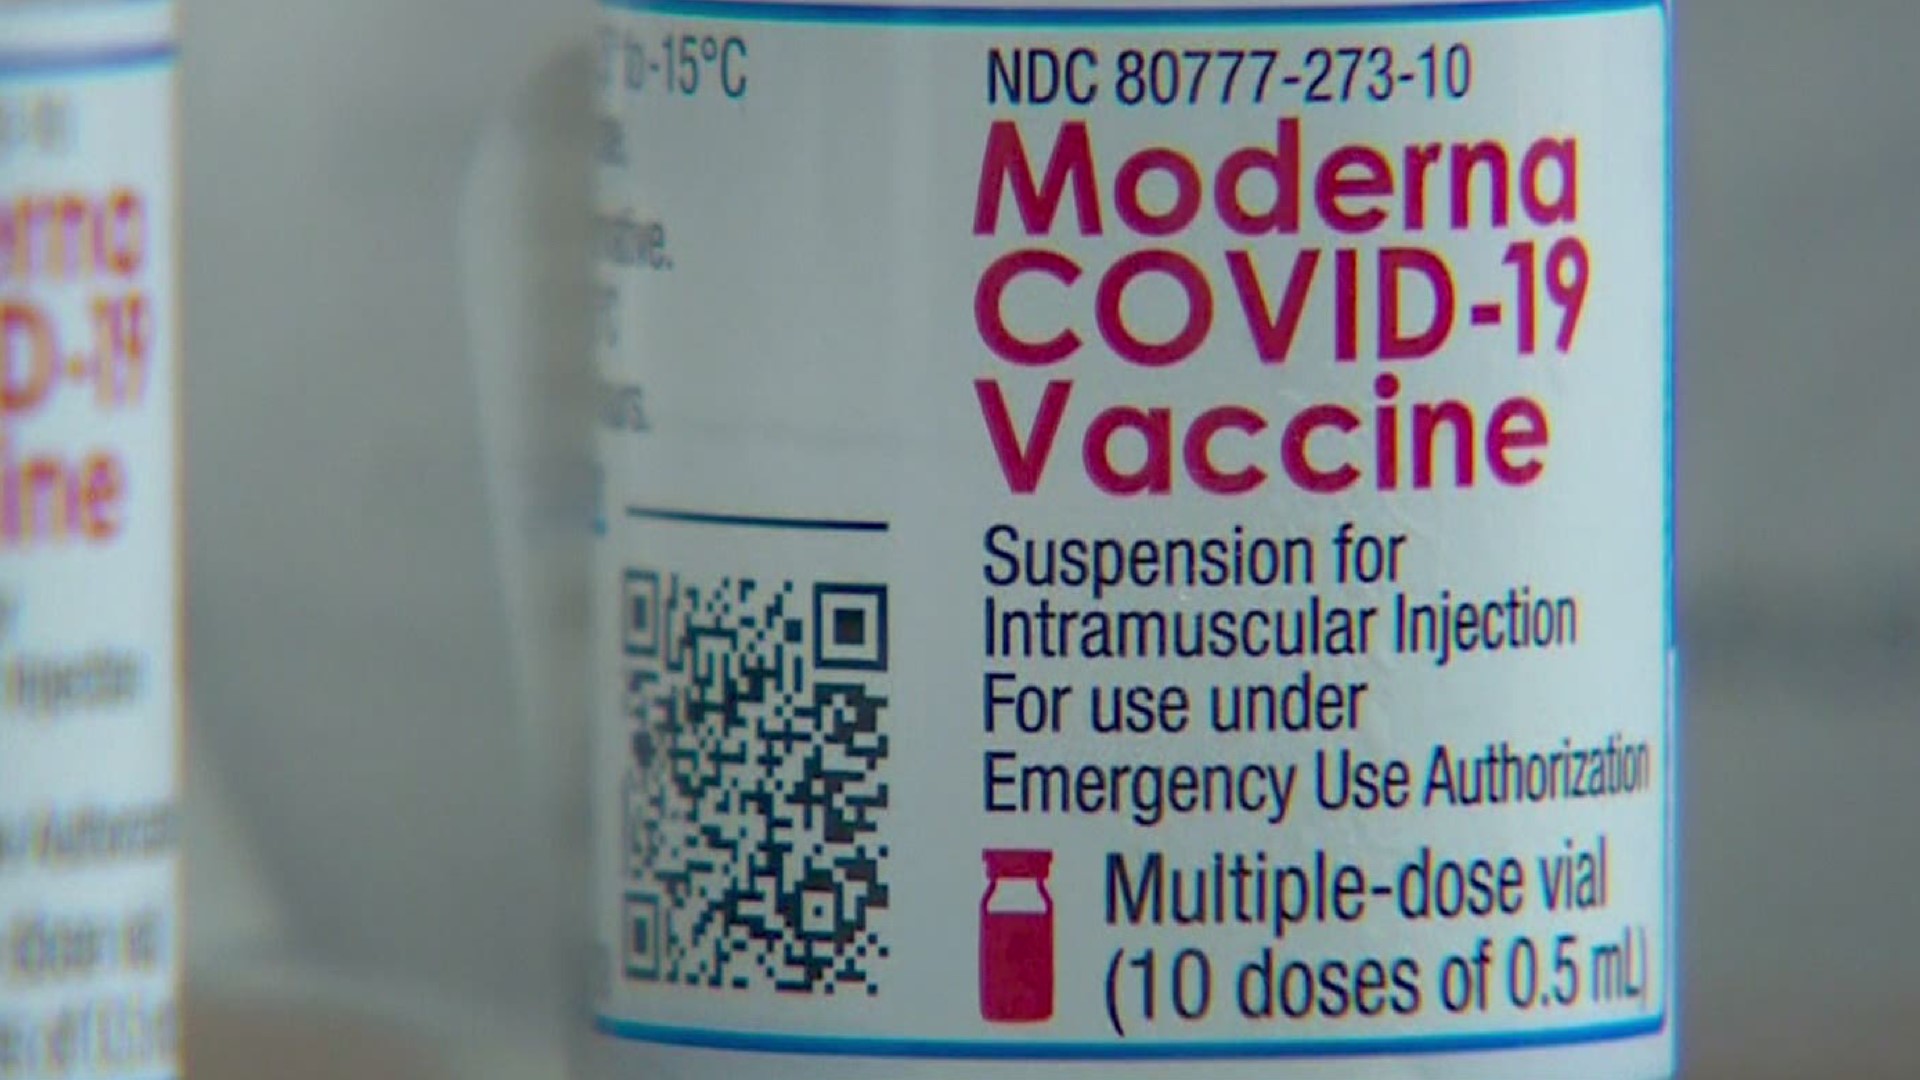 One healthcare worker suffered a serious reaction to the vaccine and is still suffering symptoms a week later.